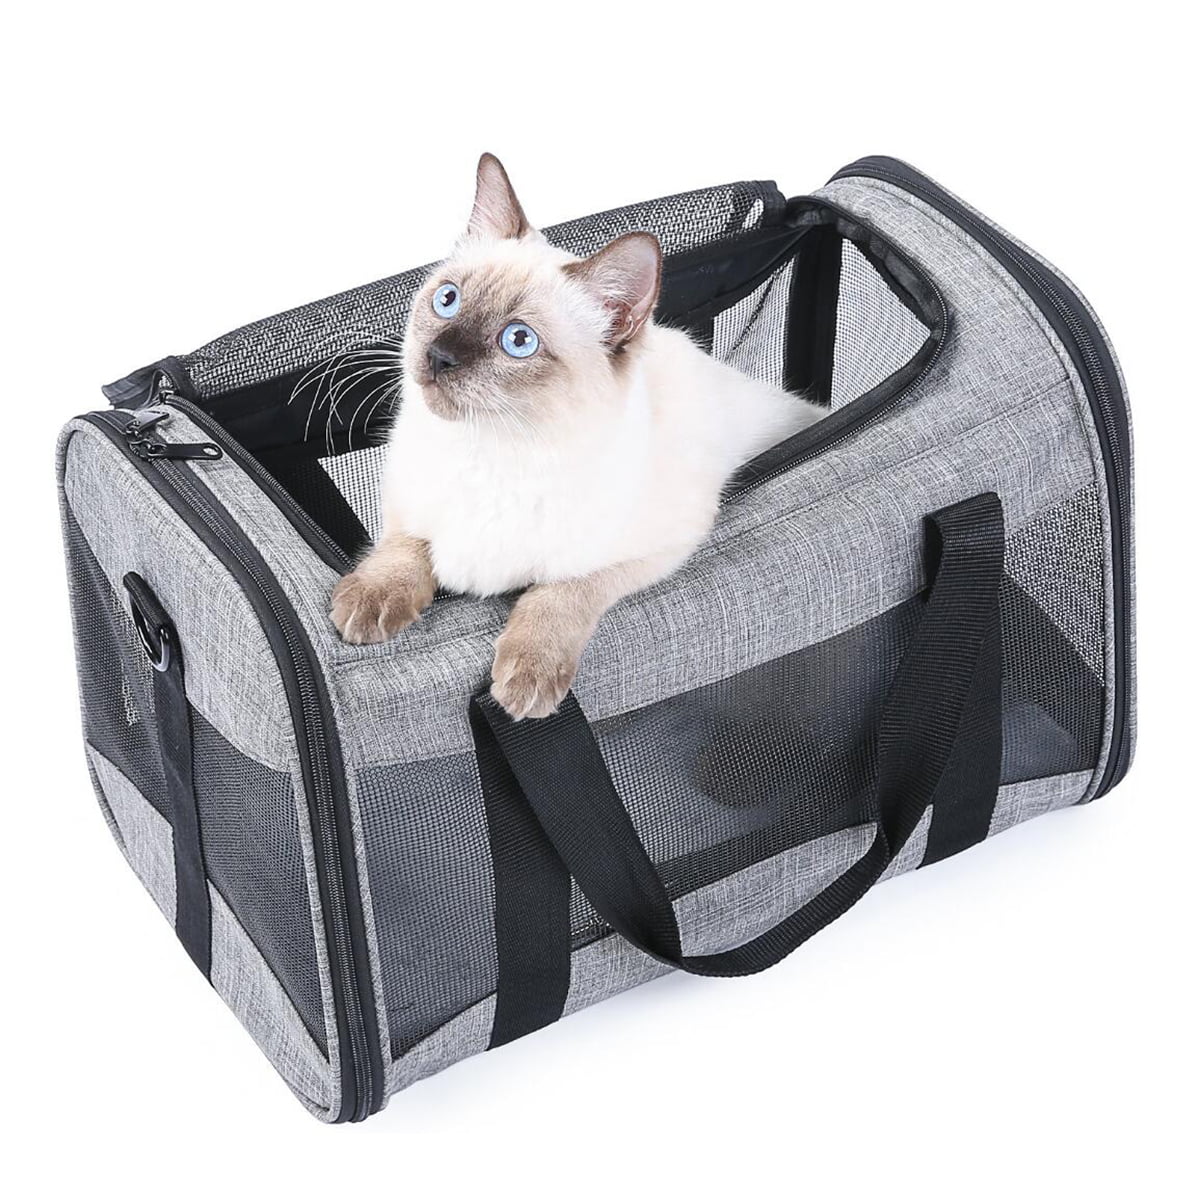 Cat Carrier, Pet Carriers Airline Approved SoftSided, Travel Carrier